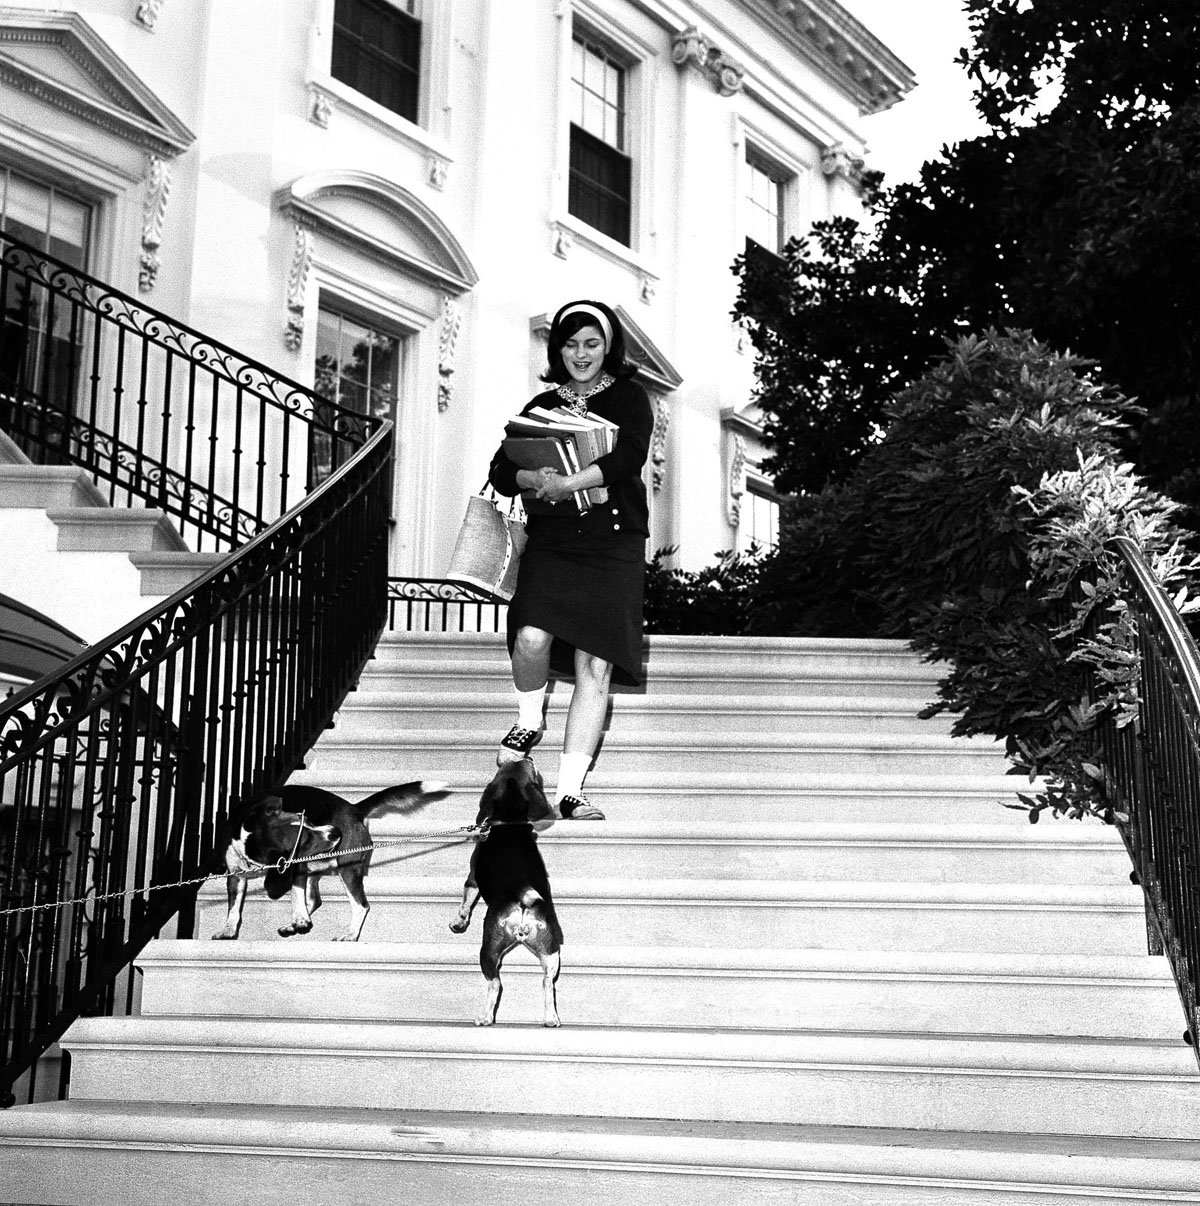 Luci, daughter of president and Mrs. Lyndon Johnson, stops on the White House steps to pet the family's beagles, Him and Her, as she leaves for school on Sept. 17, 1964. It is the first day of classes for Luci, who is in her senior year at National Cathedral School of Girls.(AP Photo)